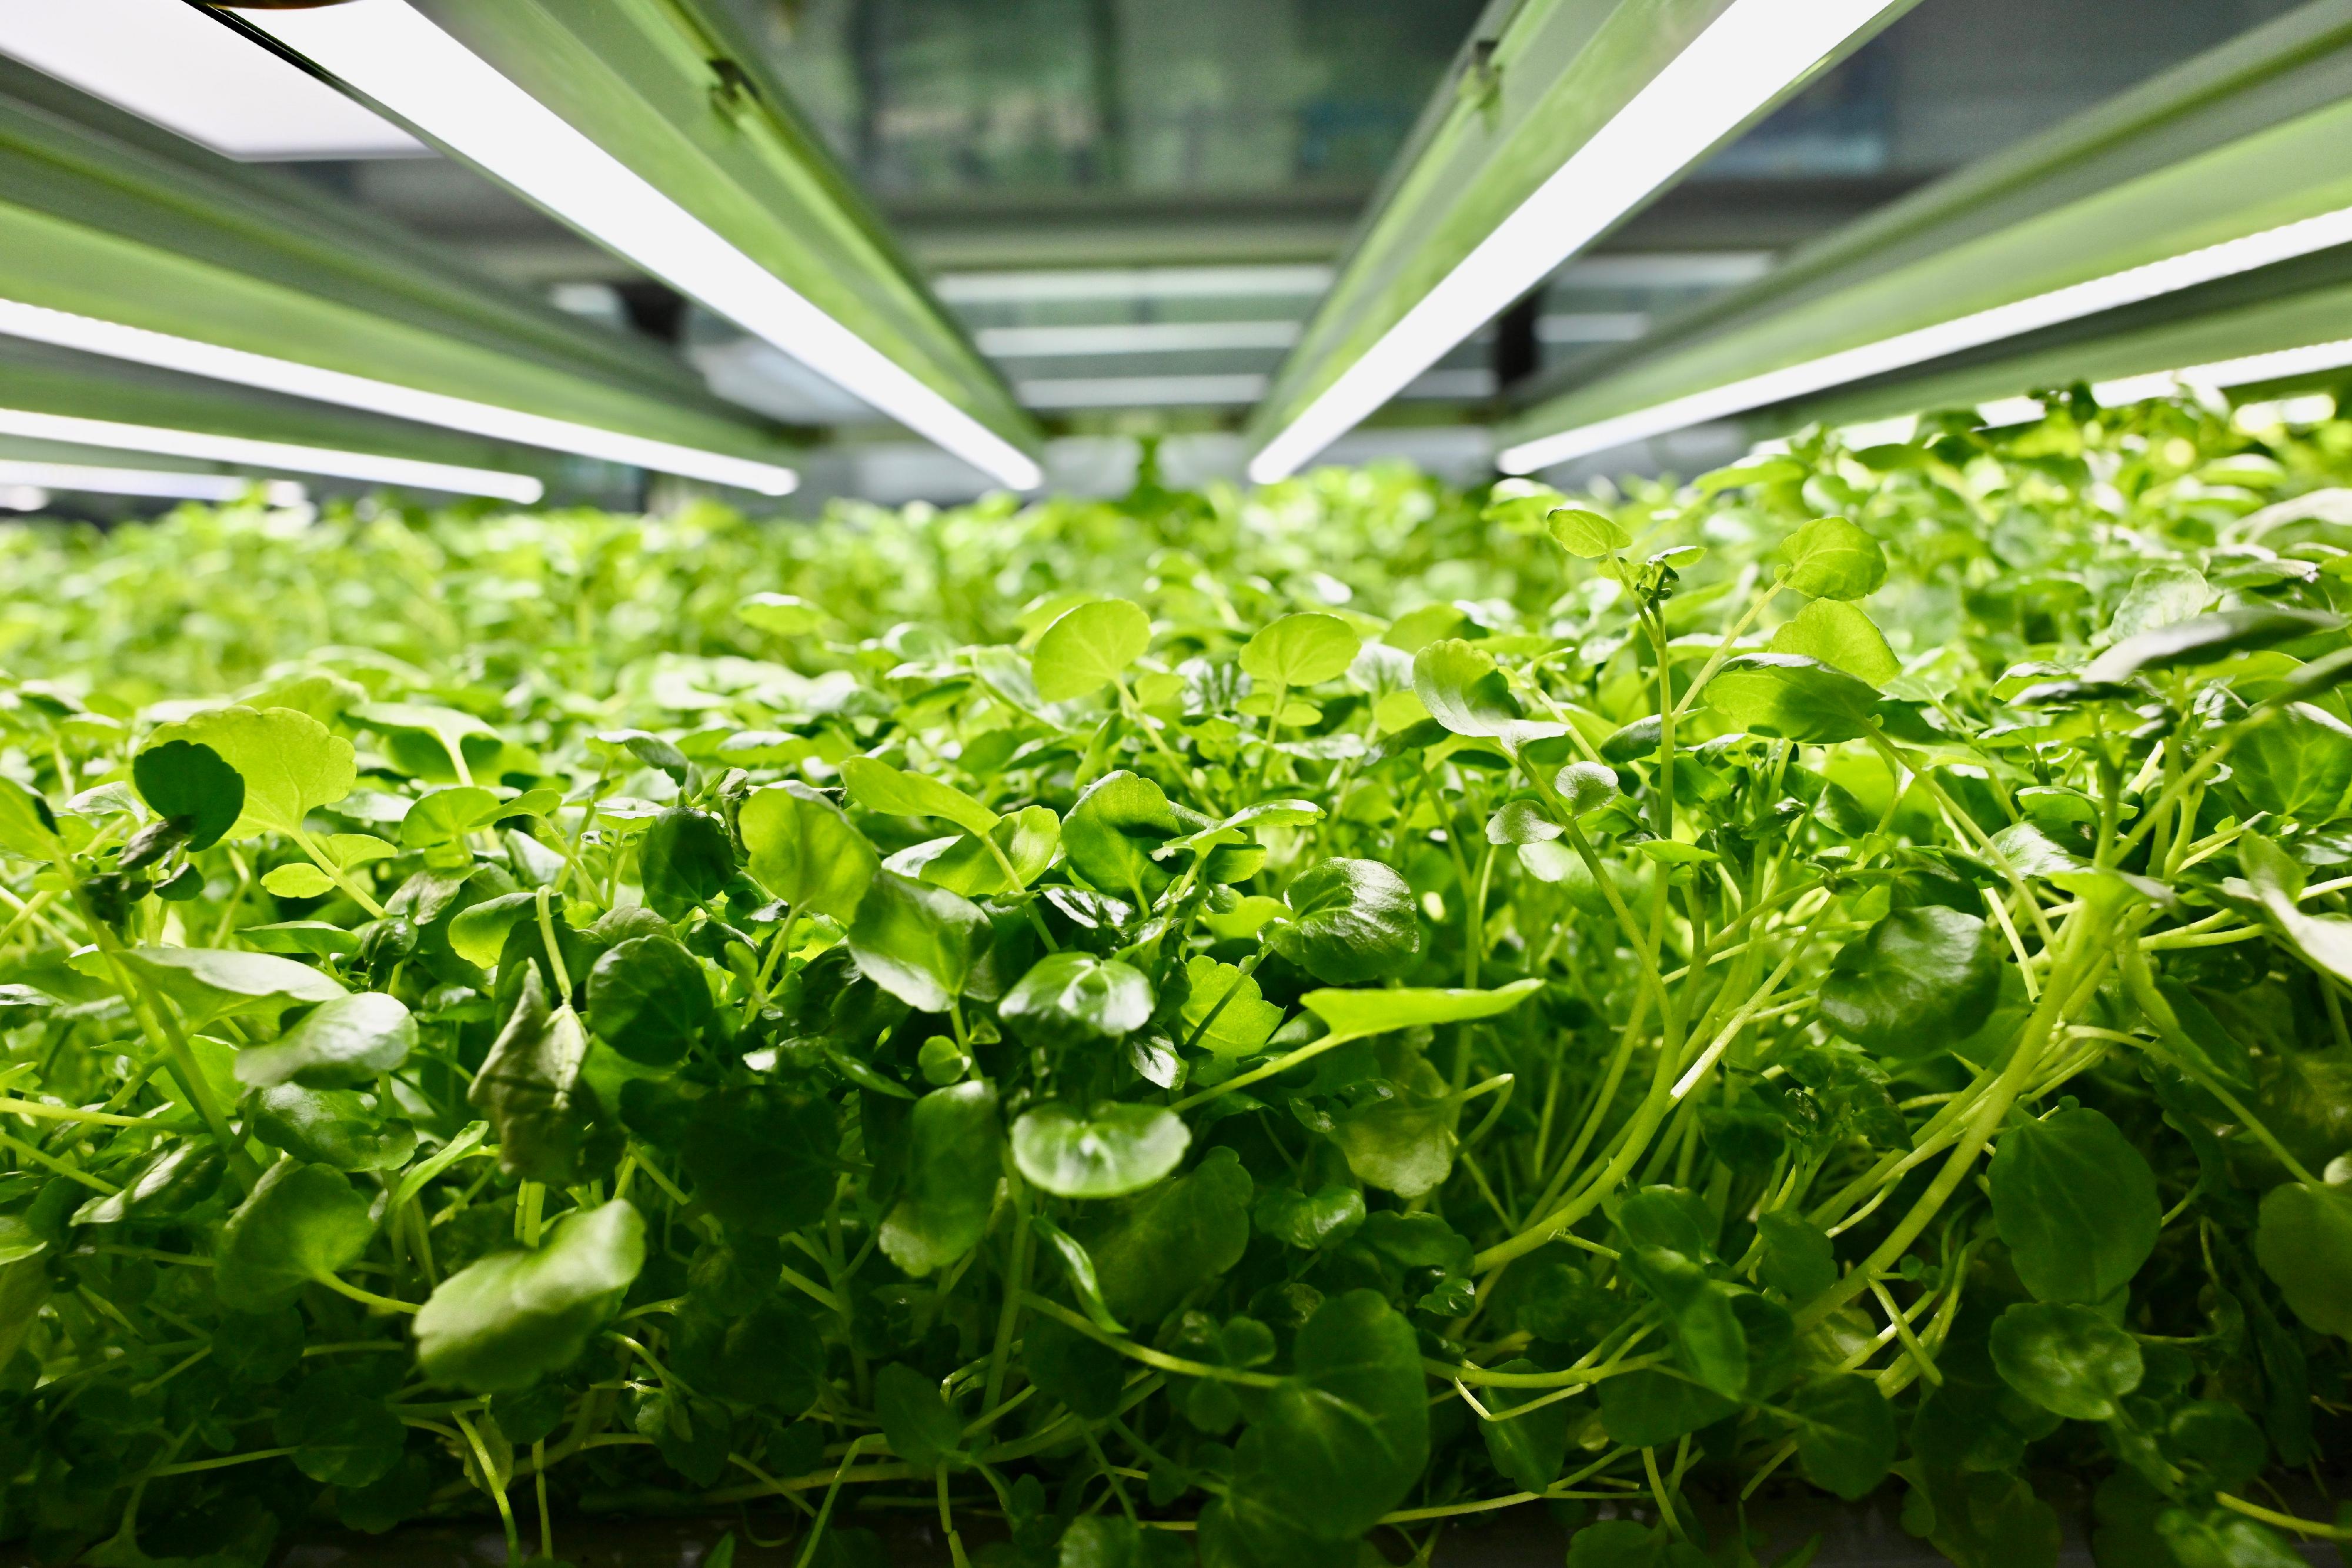 The Agriculture, Fisheries and Conservation Department and Phase 2 of the Controlled Environment Hydroponic Research and Development Centre today (July 26) showcased newly introduced hydroponic cultivation technologies as well as crops that were successfully cultivated with controlled environment hydroponic technology. Photo shows watercress successfully cultivated with controlled environment hydroponic technology.